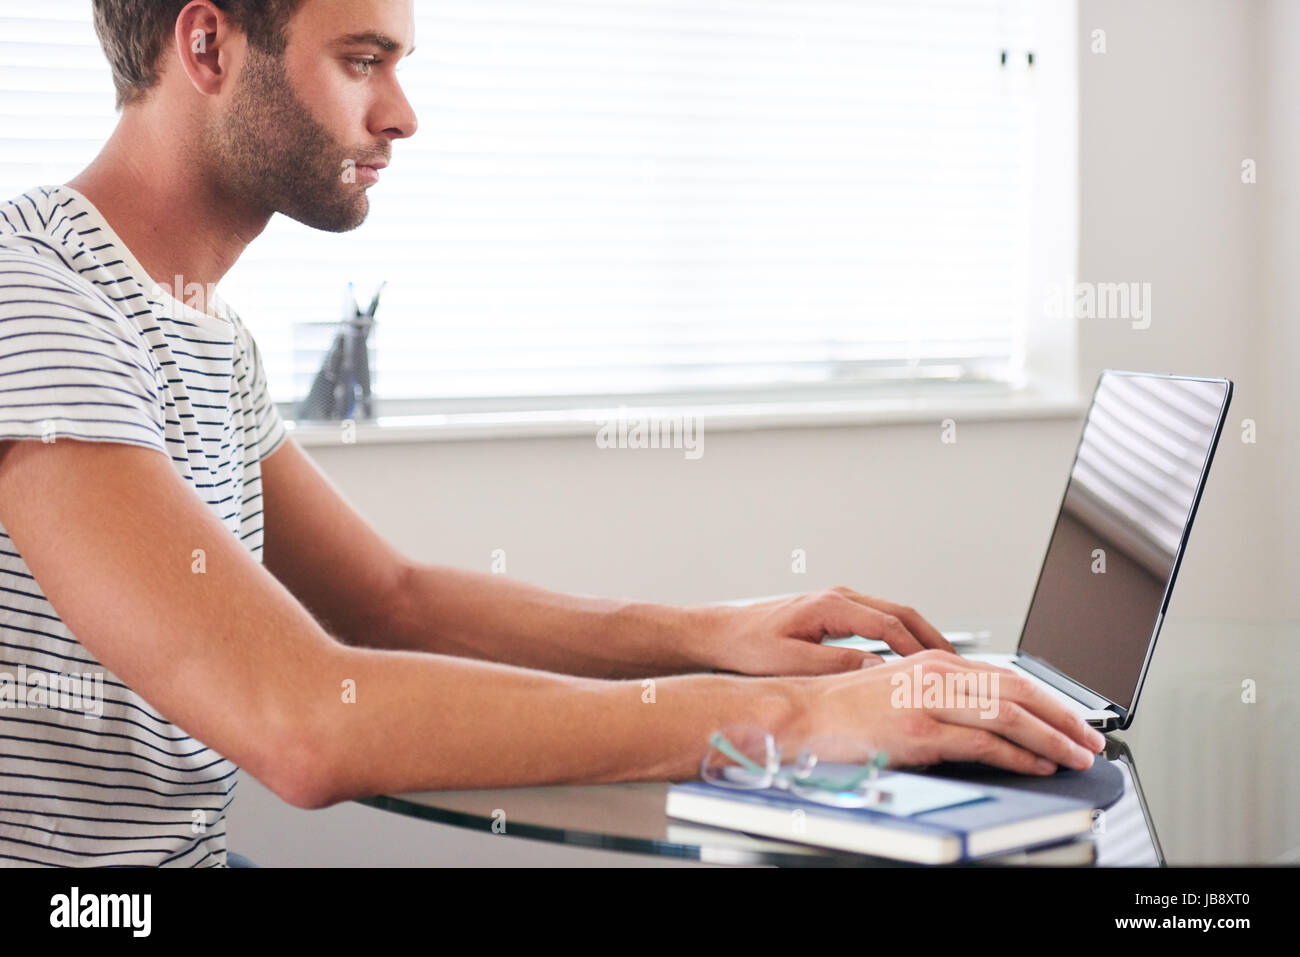 Profile image of young well groomed caucasian male student with a short trimmed beard typing on his computer, seated indoors in his living room next t Stock Photo